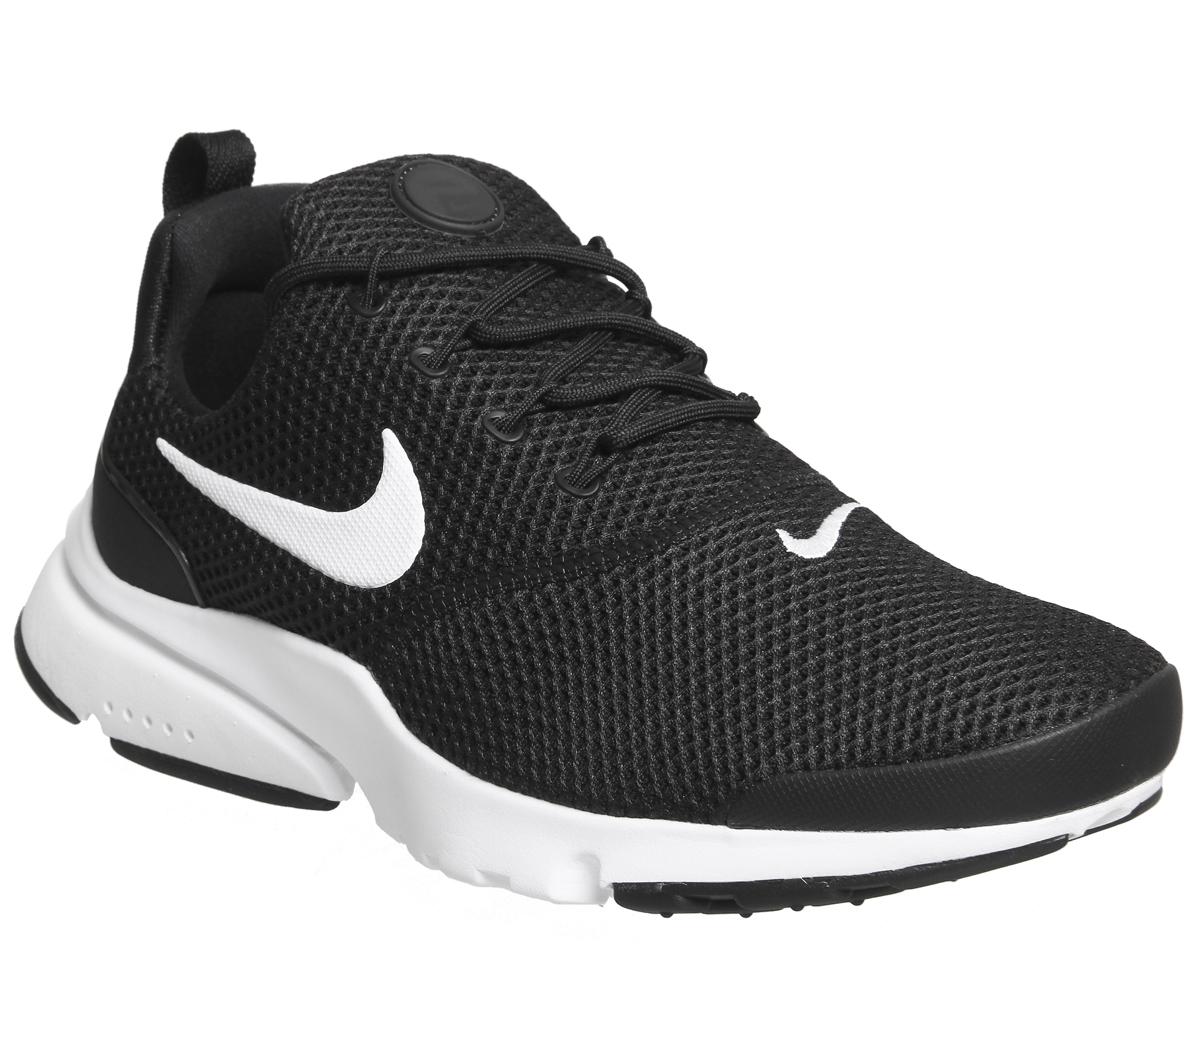 Nike Presto Fly Trainers Black White Black - Hers trainers